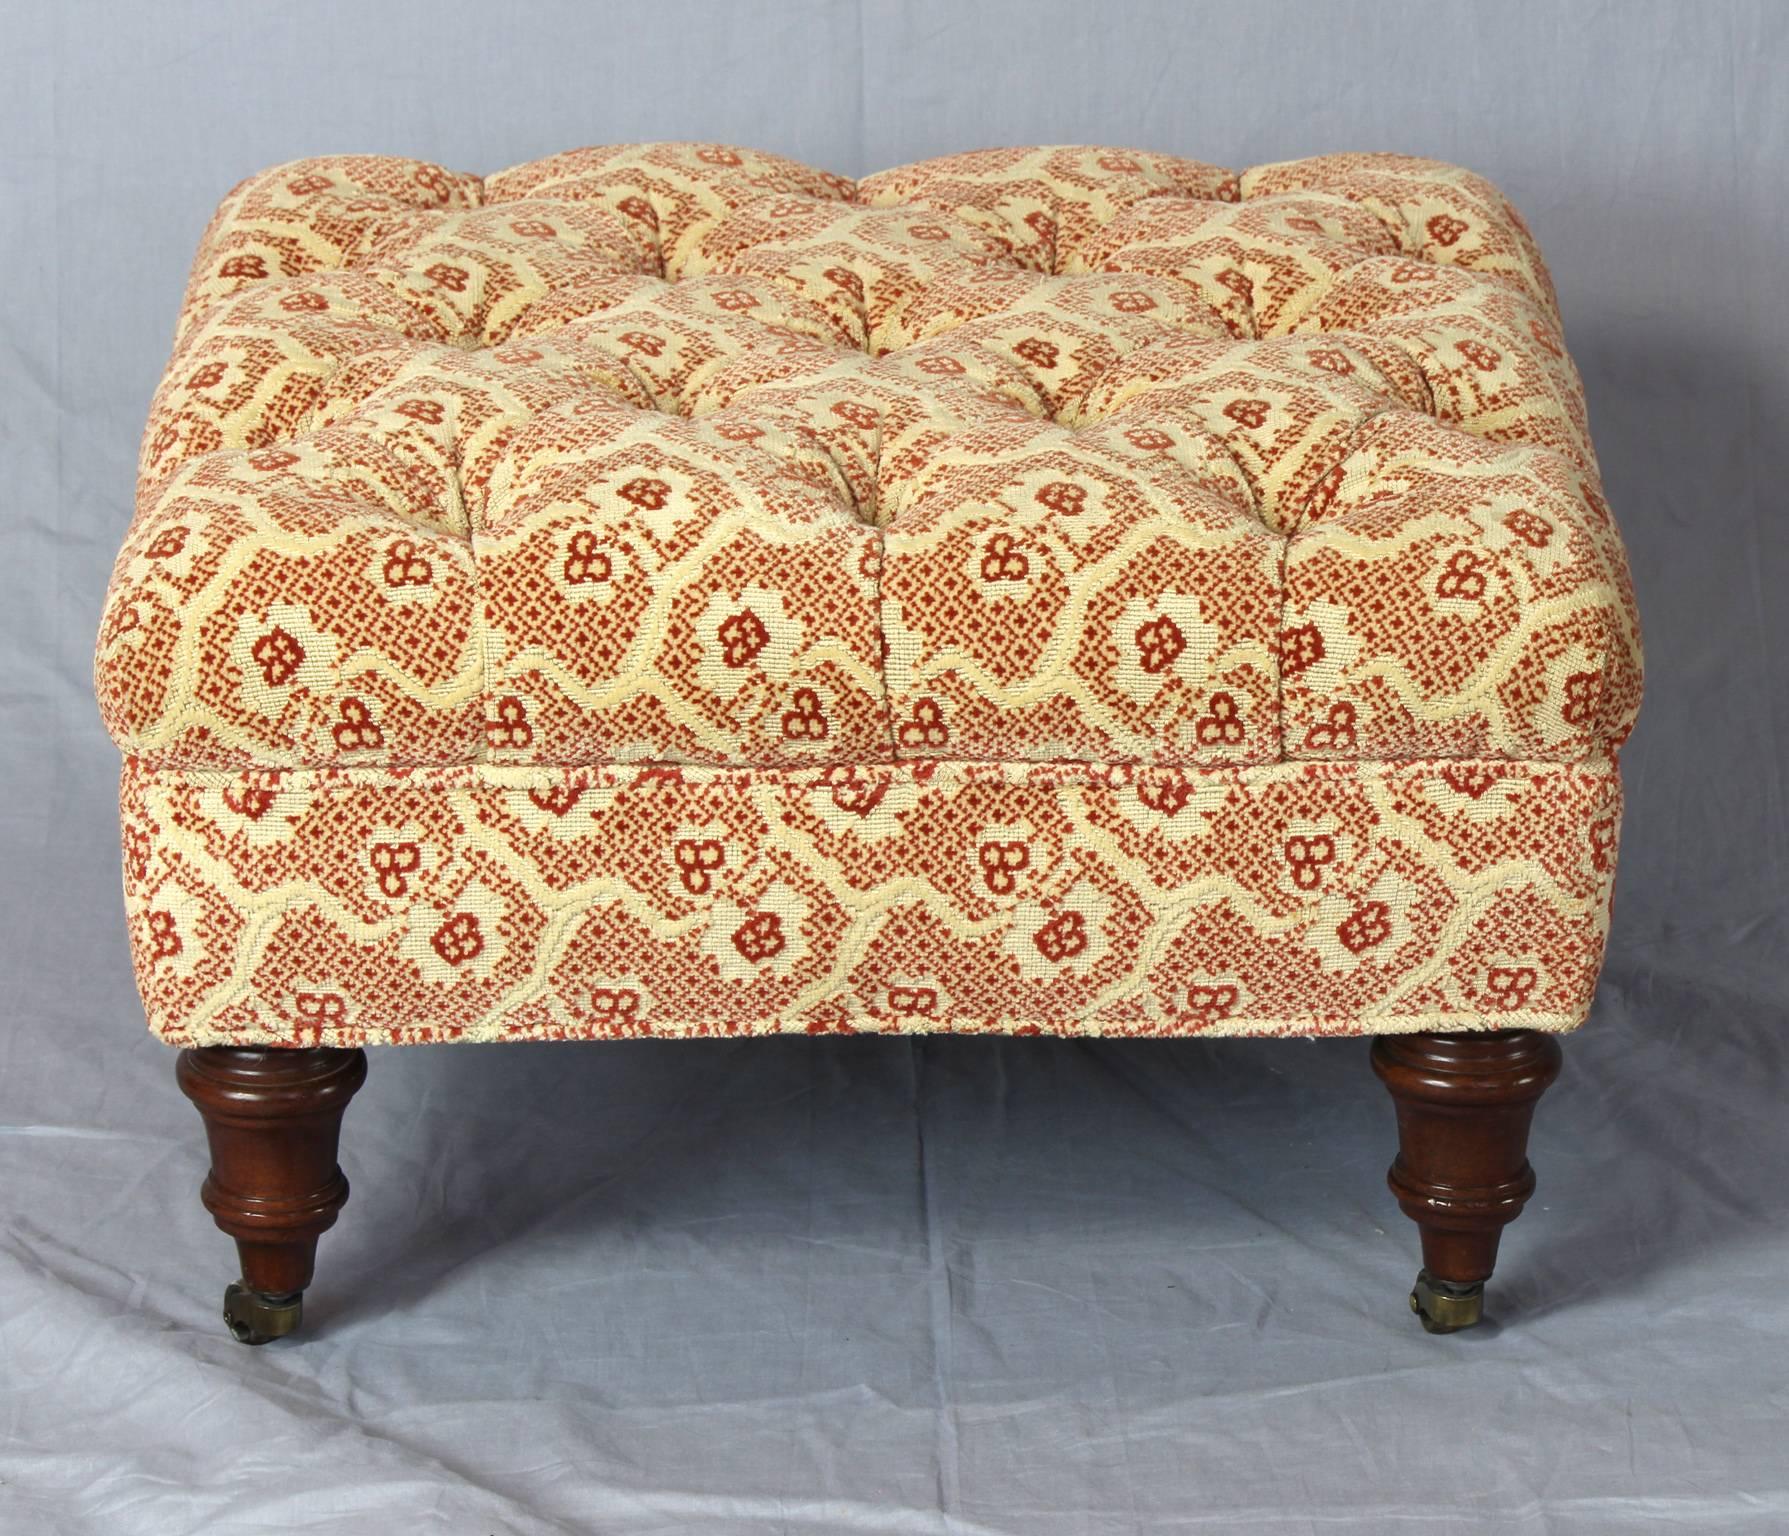 Edwardian Small Buttoned Footstool or Ottoman